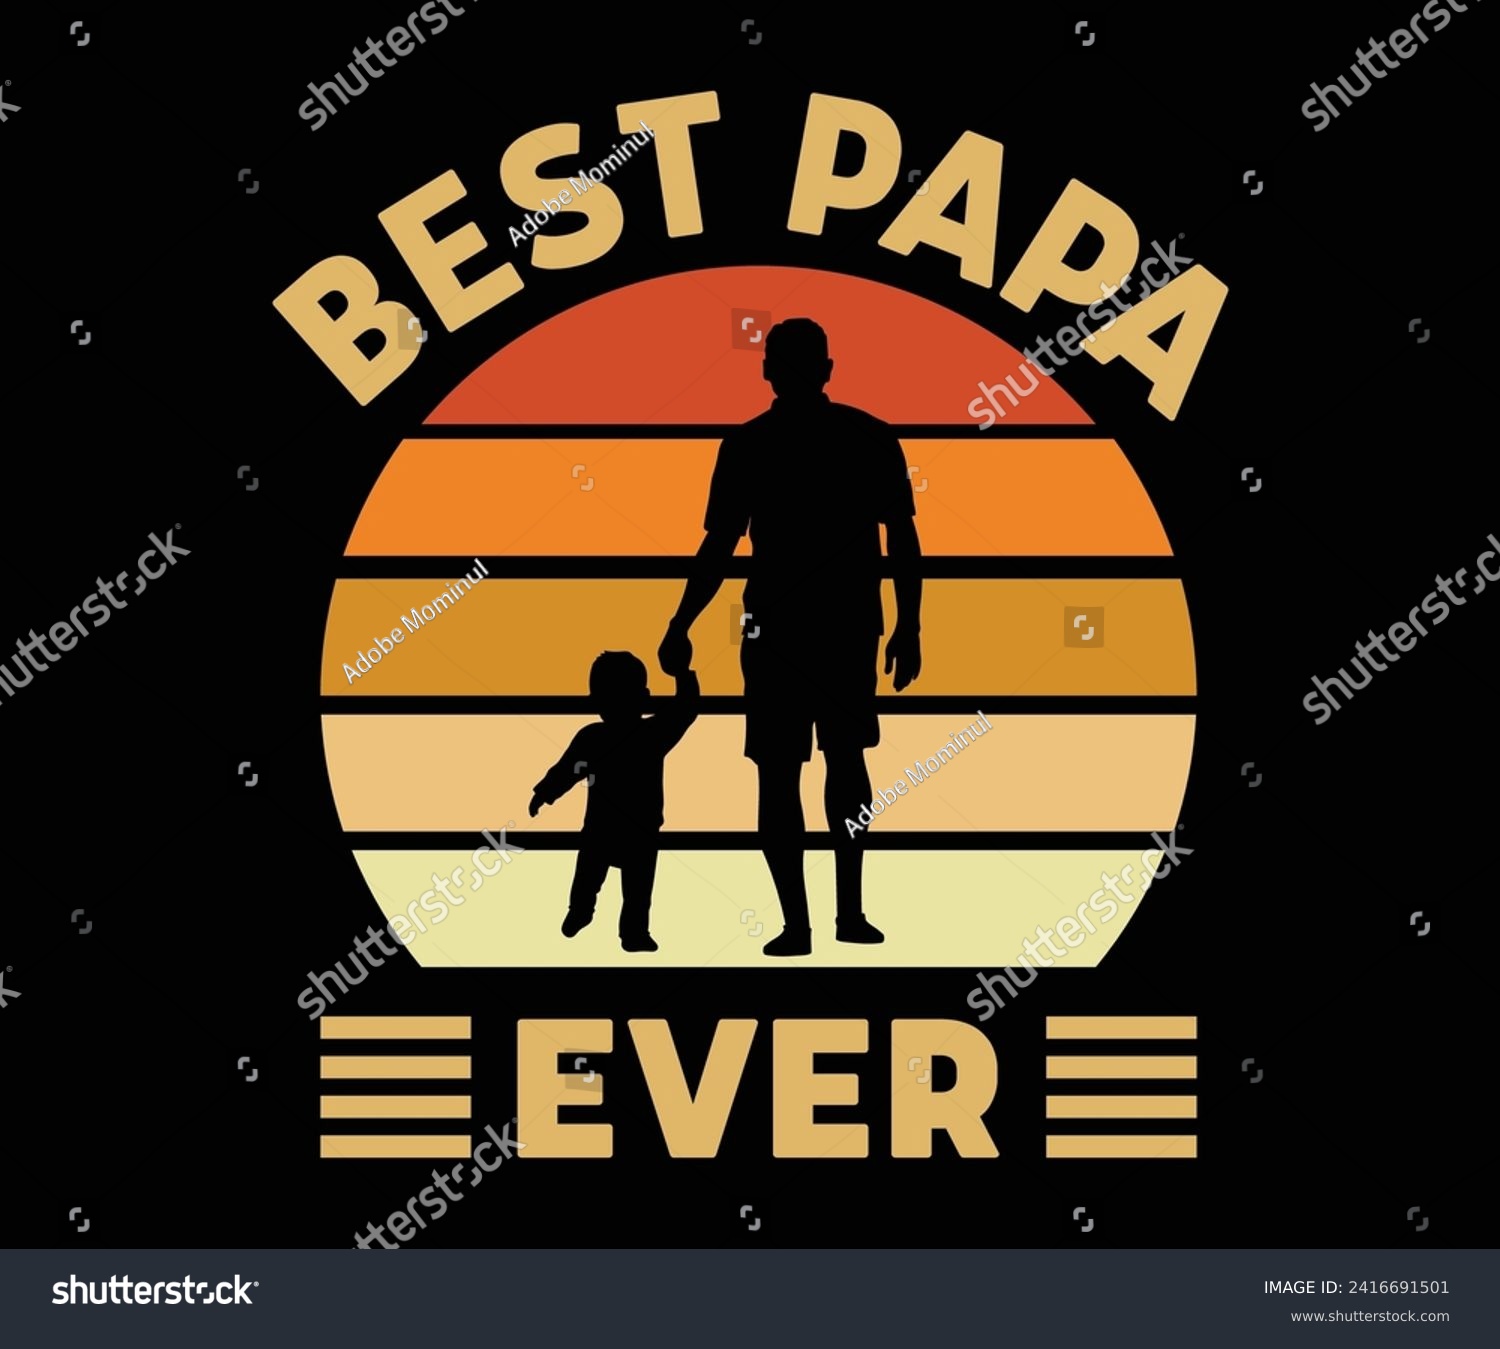 SVG of 
Best Papa Ever Retro Vintage,Father's Day Svg,Papa svg,Grandpa Svg,Father's Day Saying Qoutes,Dad Svg,Funny Father, Gift For Dad Svg,Daddy Svg,Family Svg,T shirt Design,Svg Cut File,Typography svg